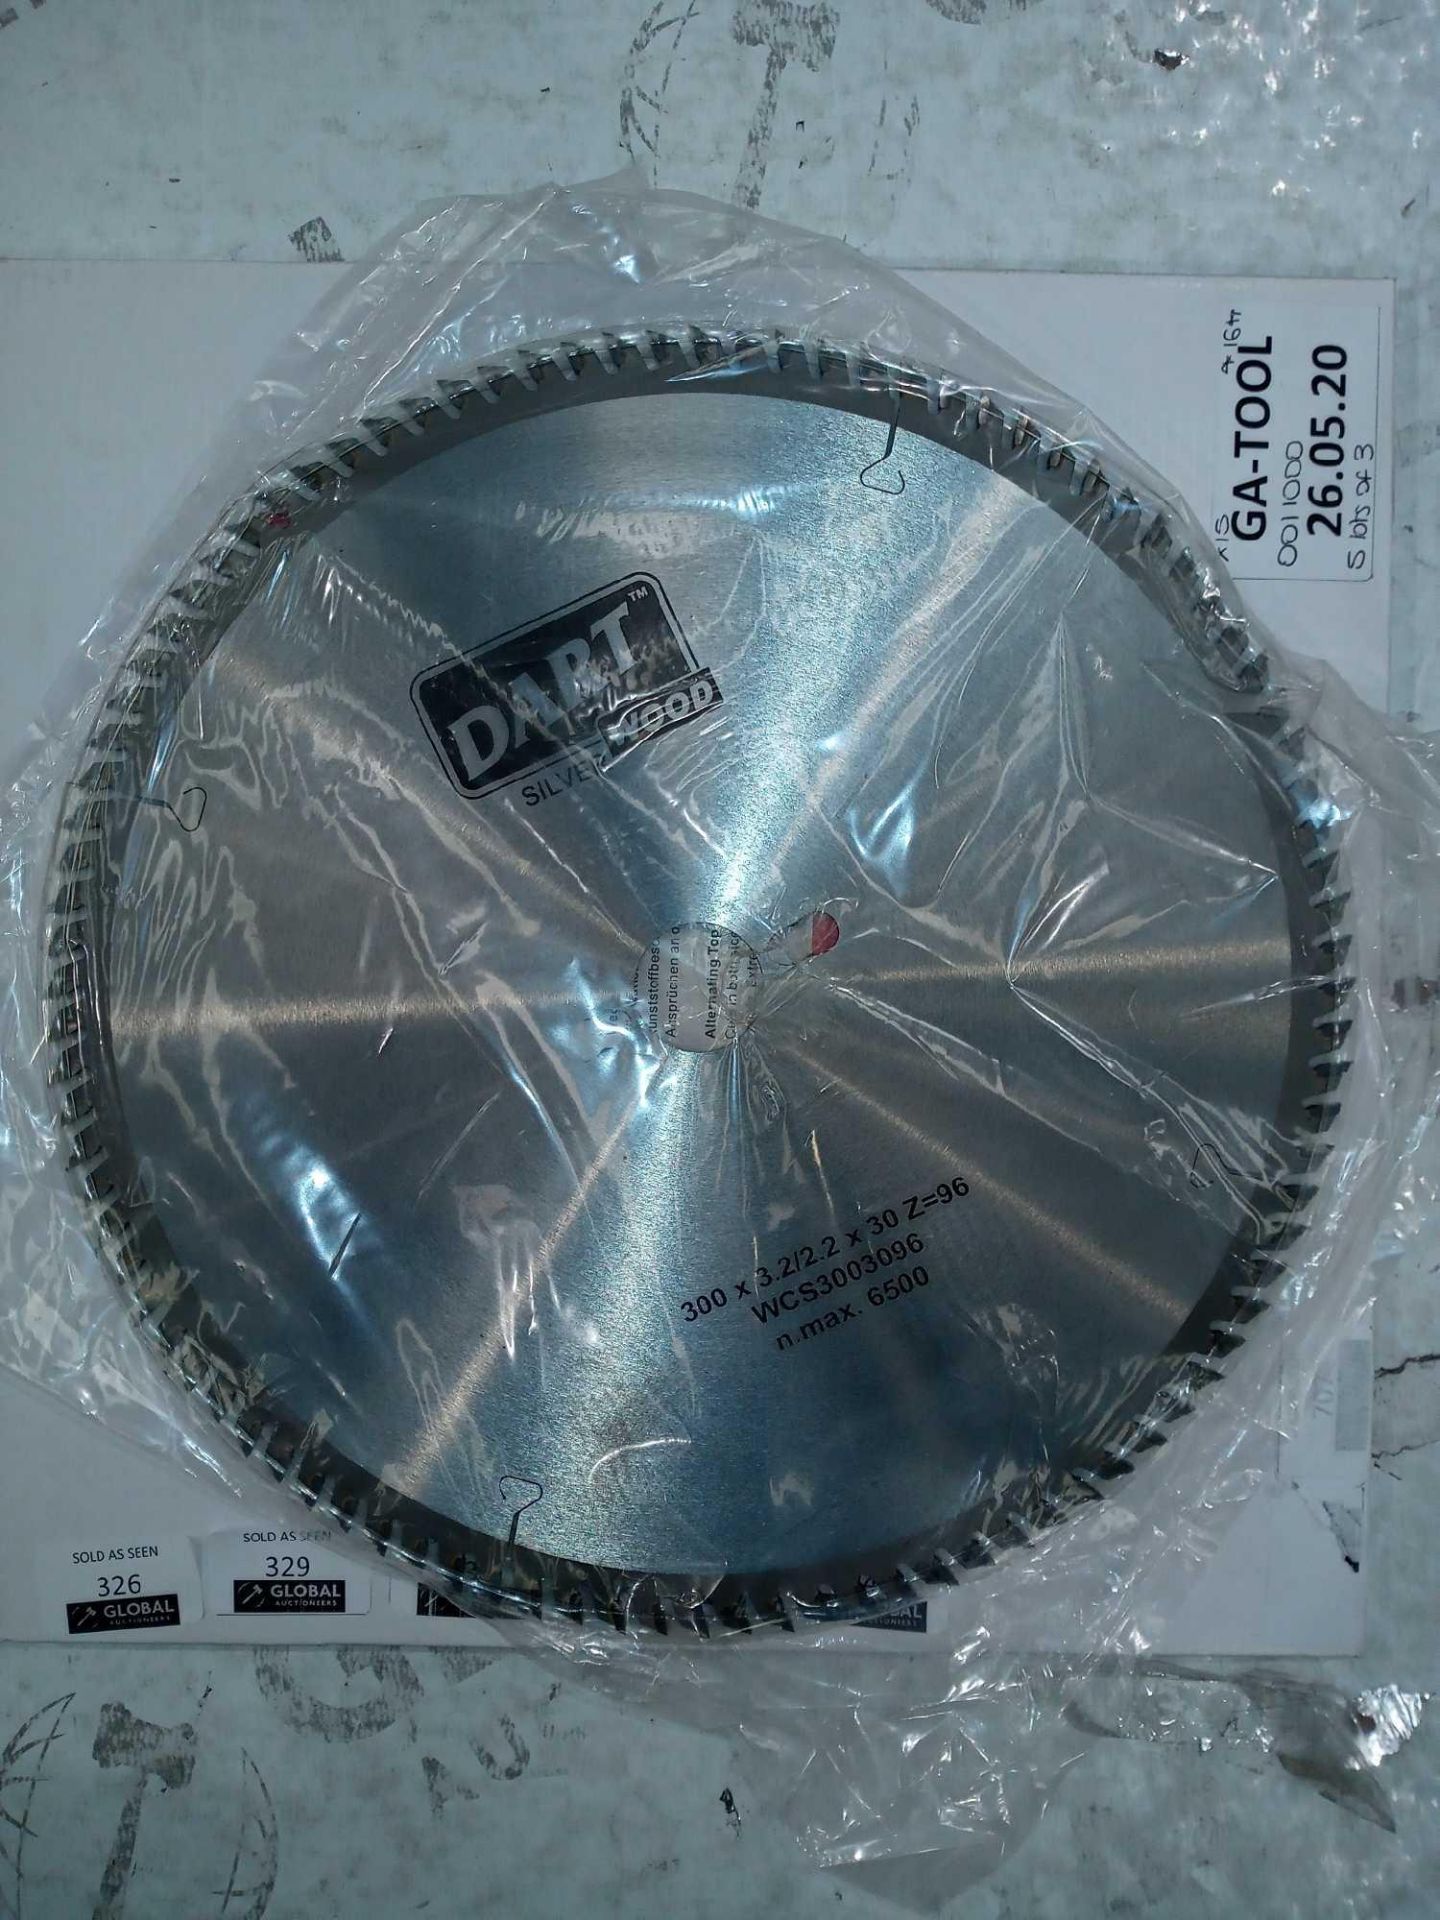 Lot To Contain 3 Boxed Brand New 300 X 3.2 X 30 Z = 96 Wood Cutting Saw Blades Combined RRP £330(